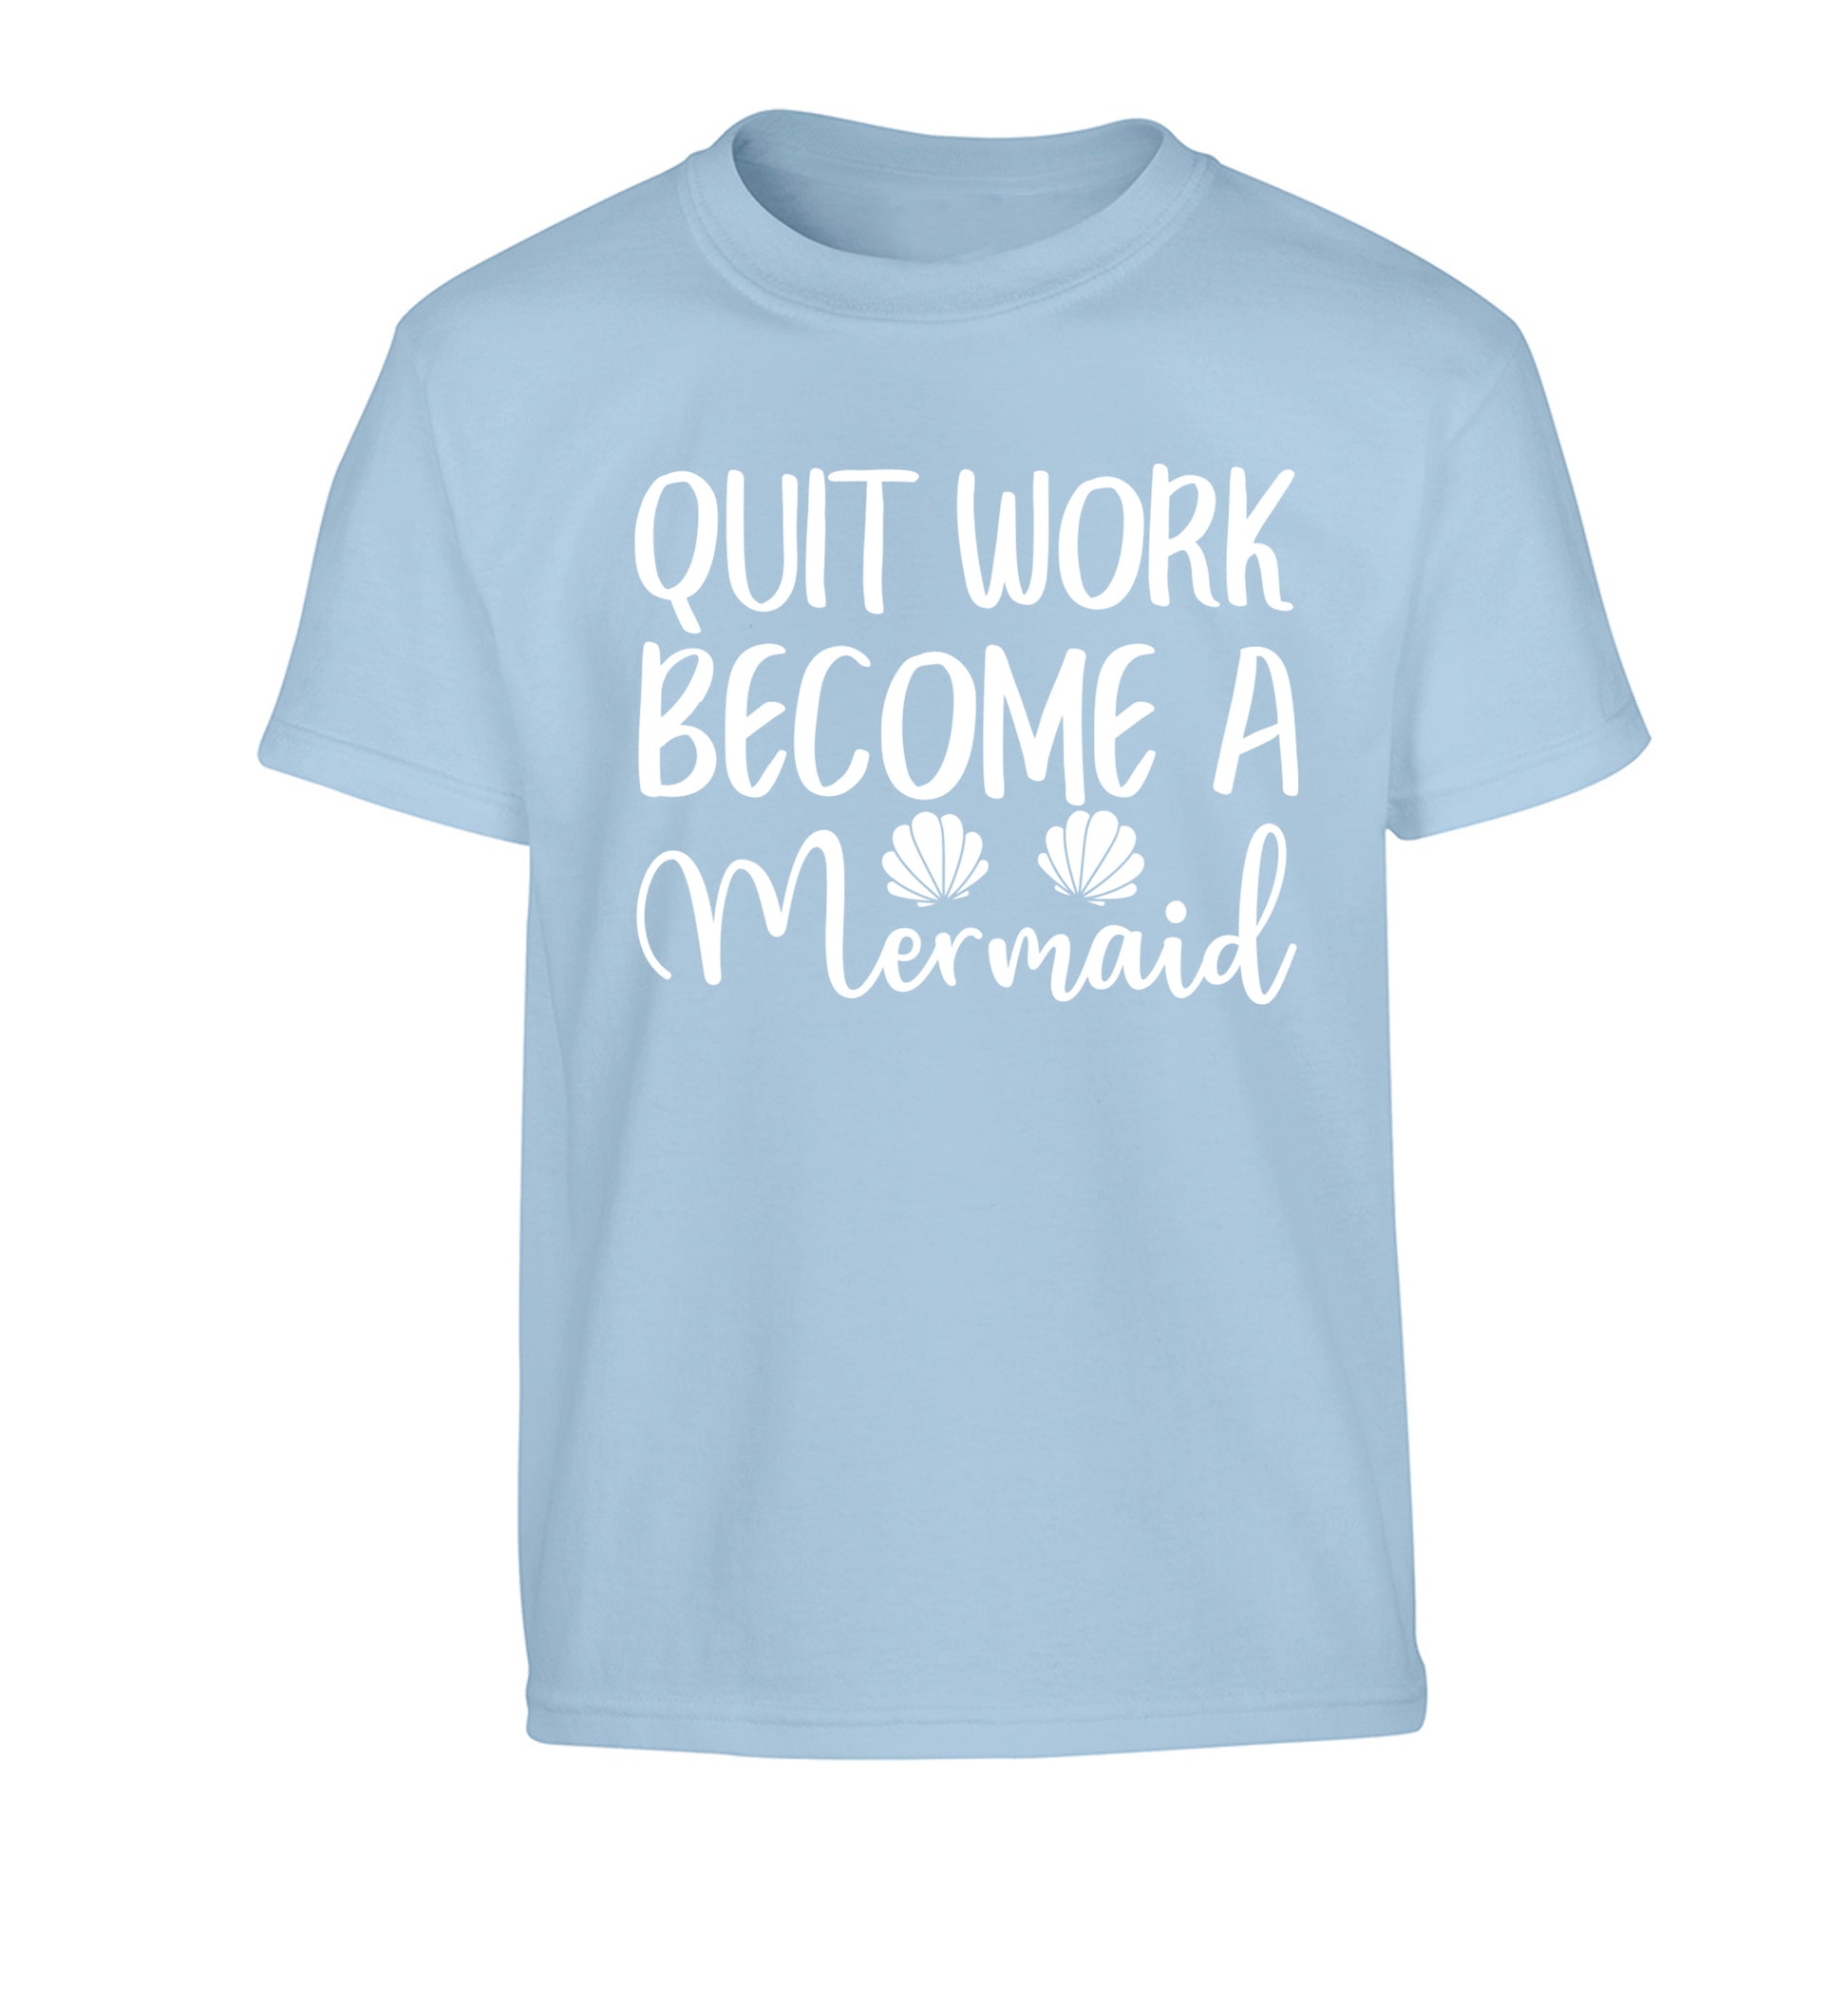 Quit work become a mermaid Children's light blue Tshirt 12-13 Years